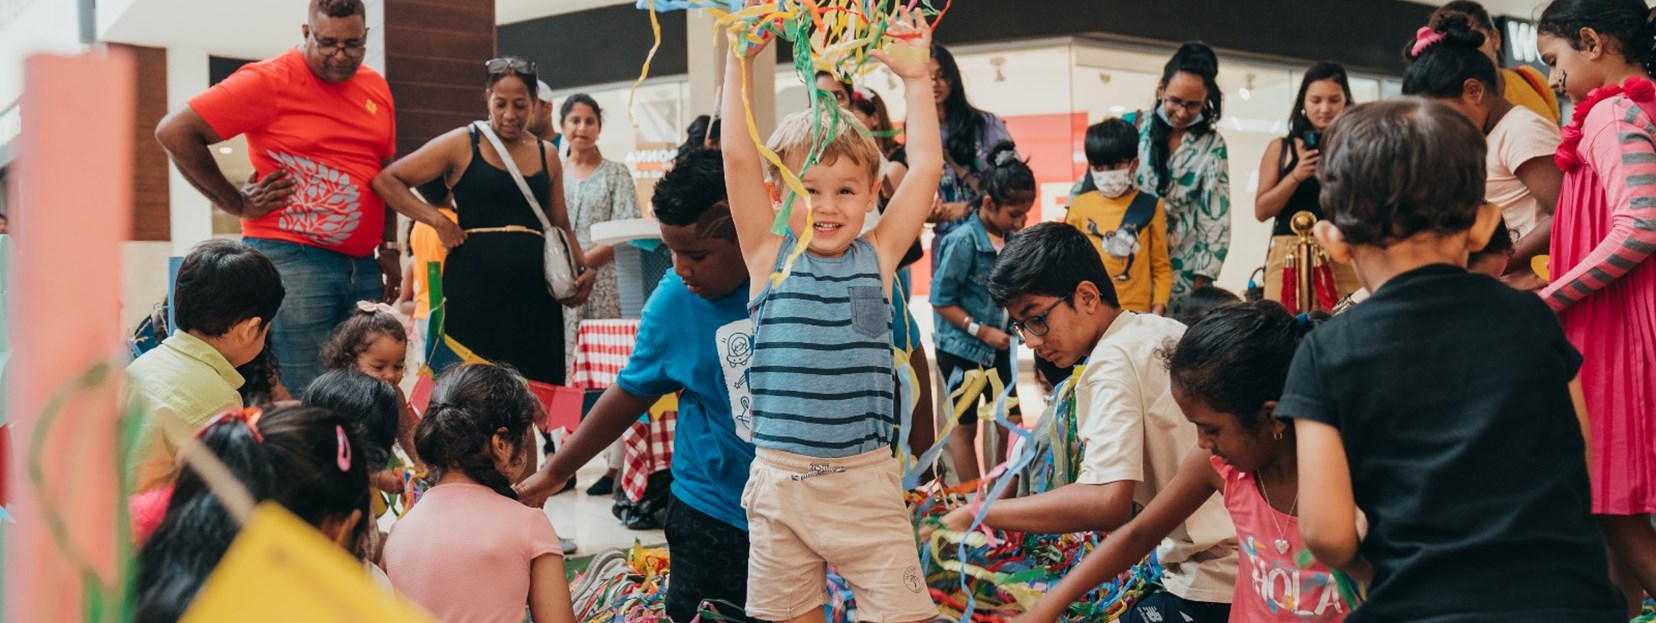 Easter Festivities at Ascencia Malls in Mauritius